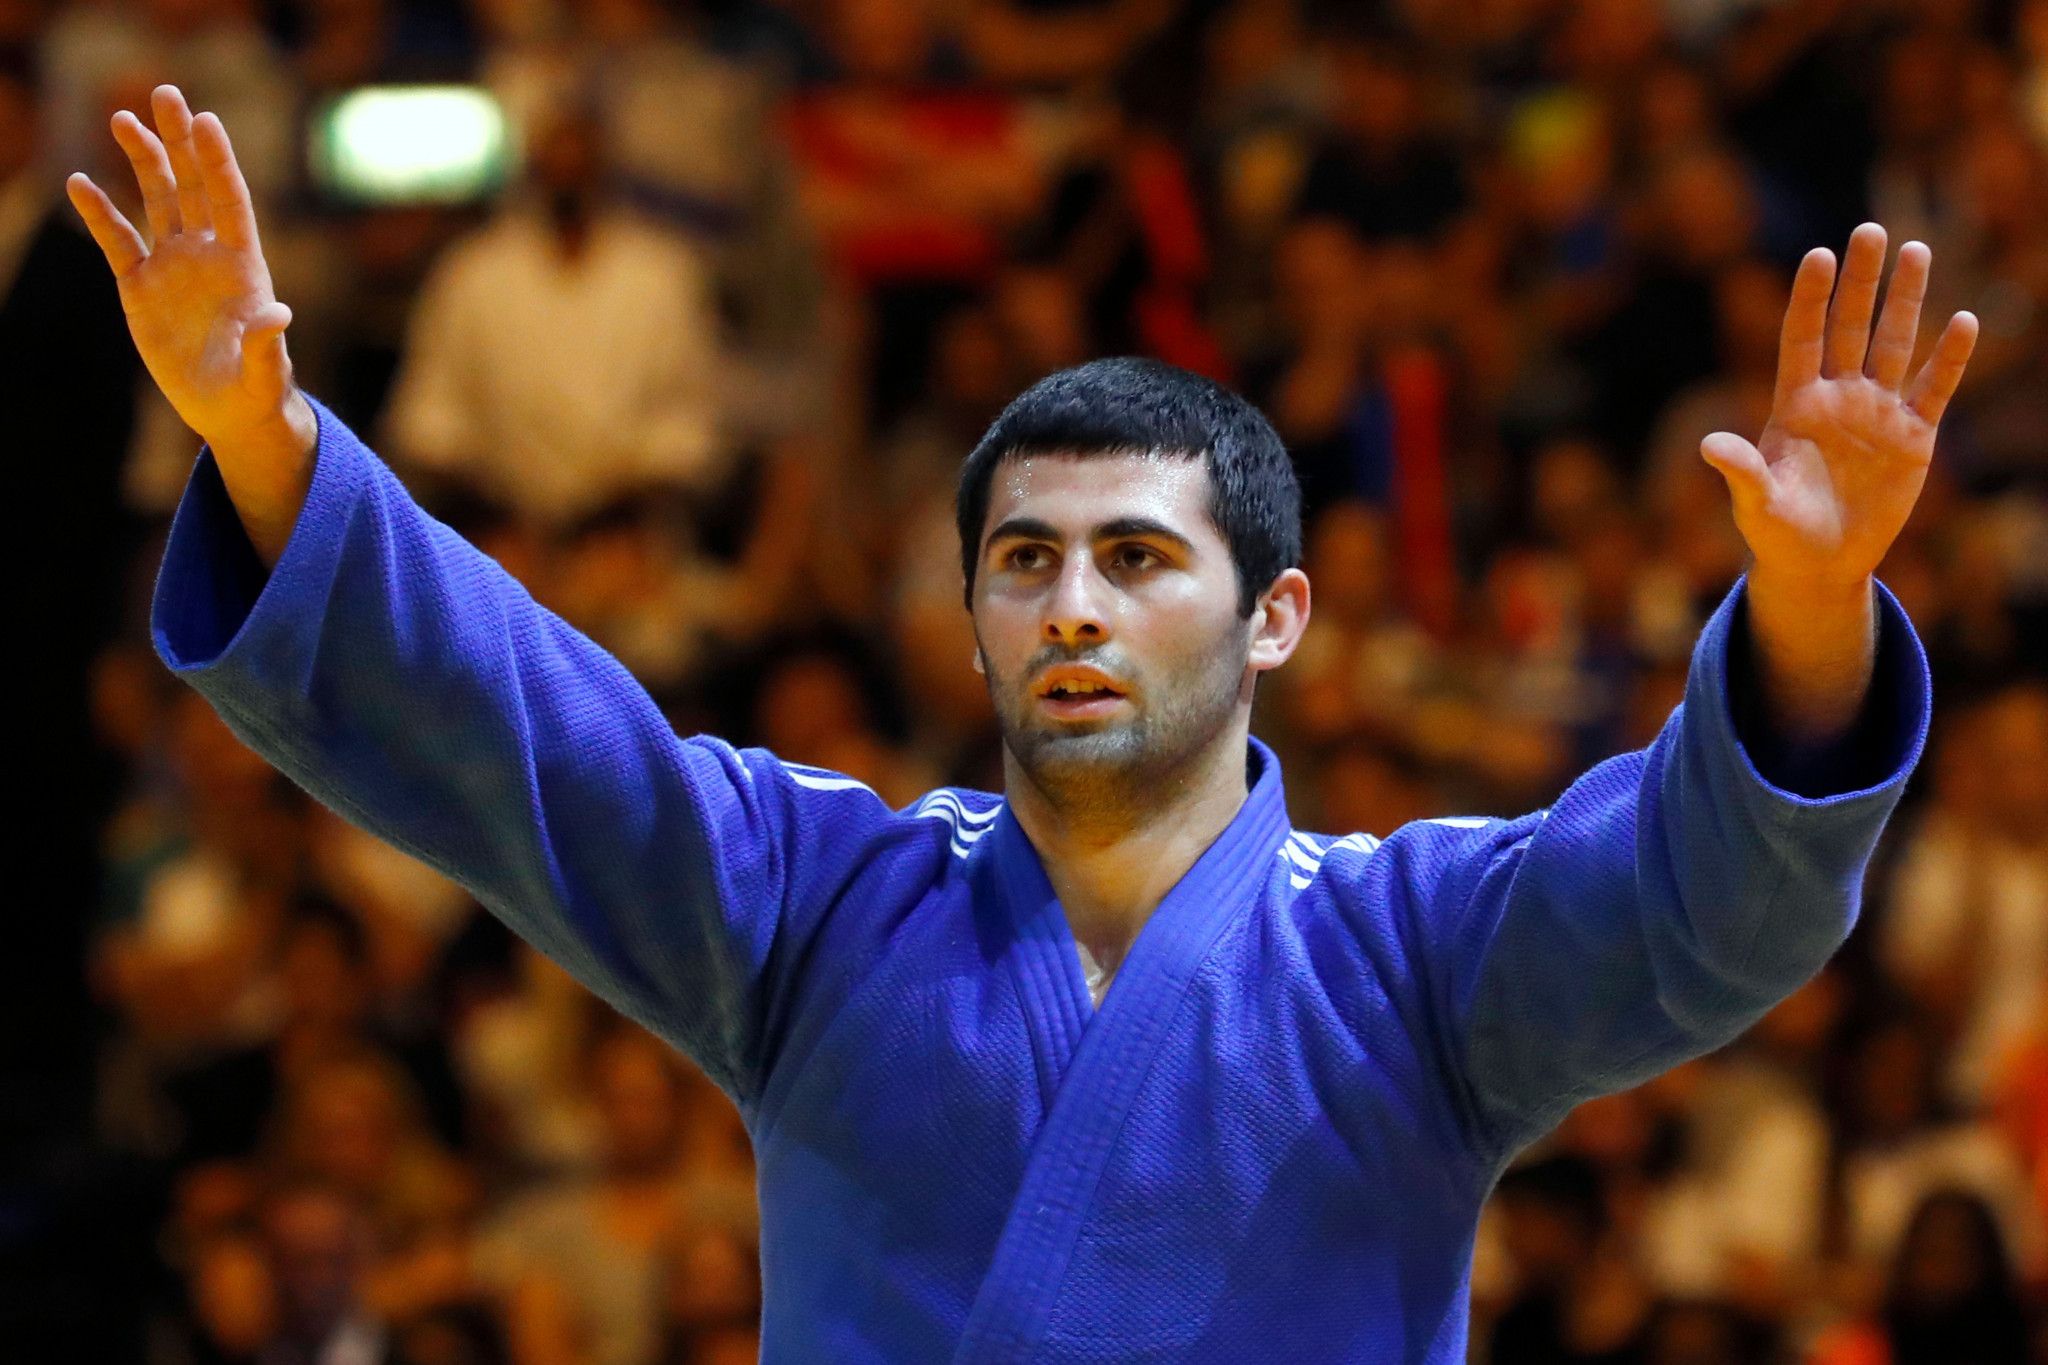 Mikhail Igolnikov was one of three Russian judoka to win gold today under the IJF flag ©Getty Images